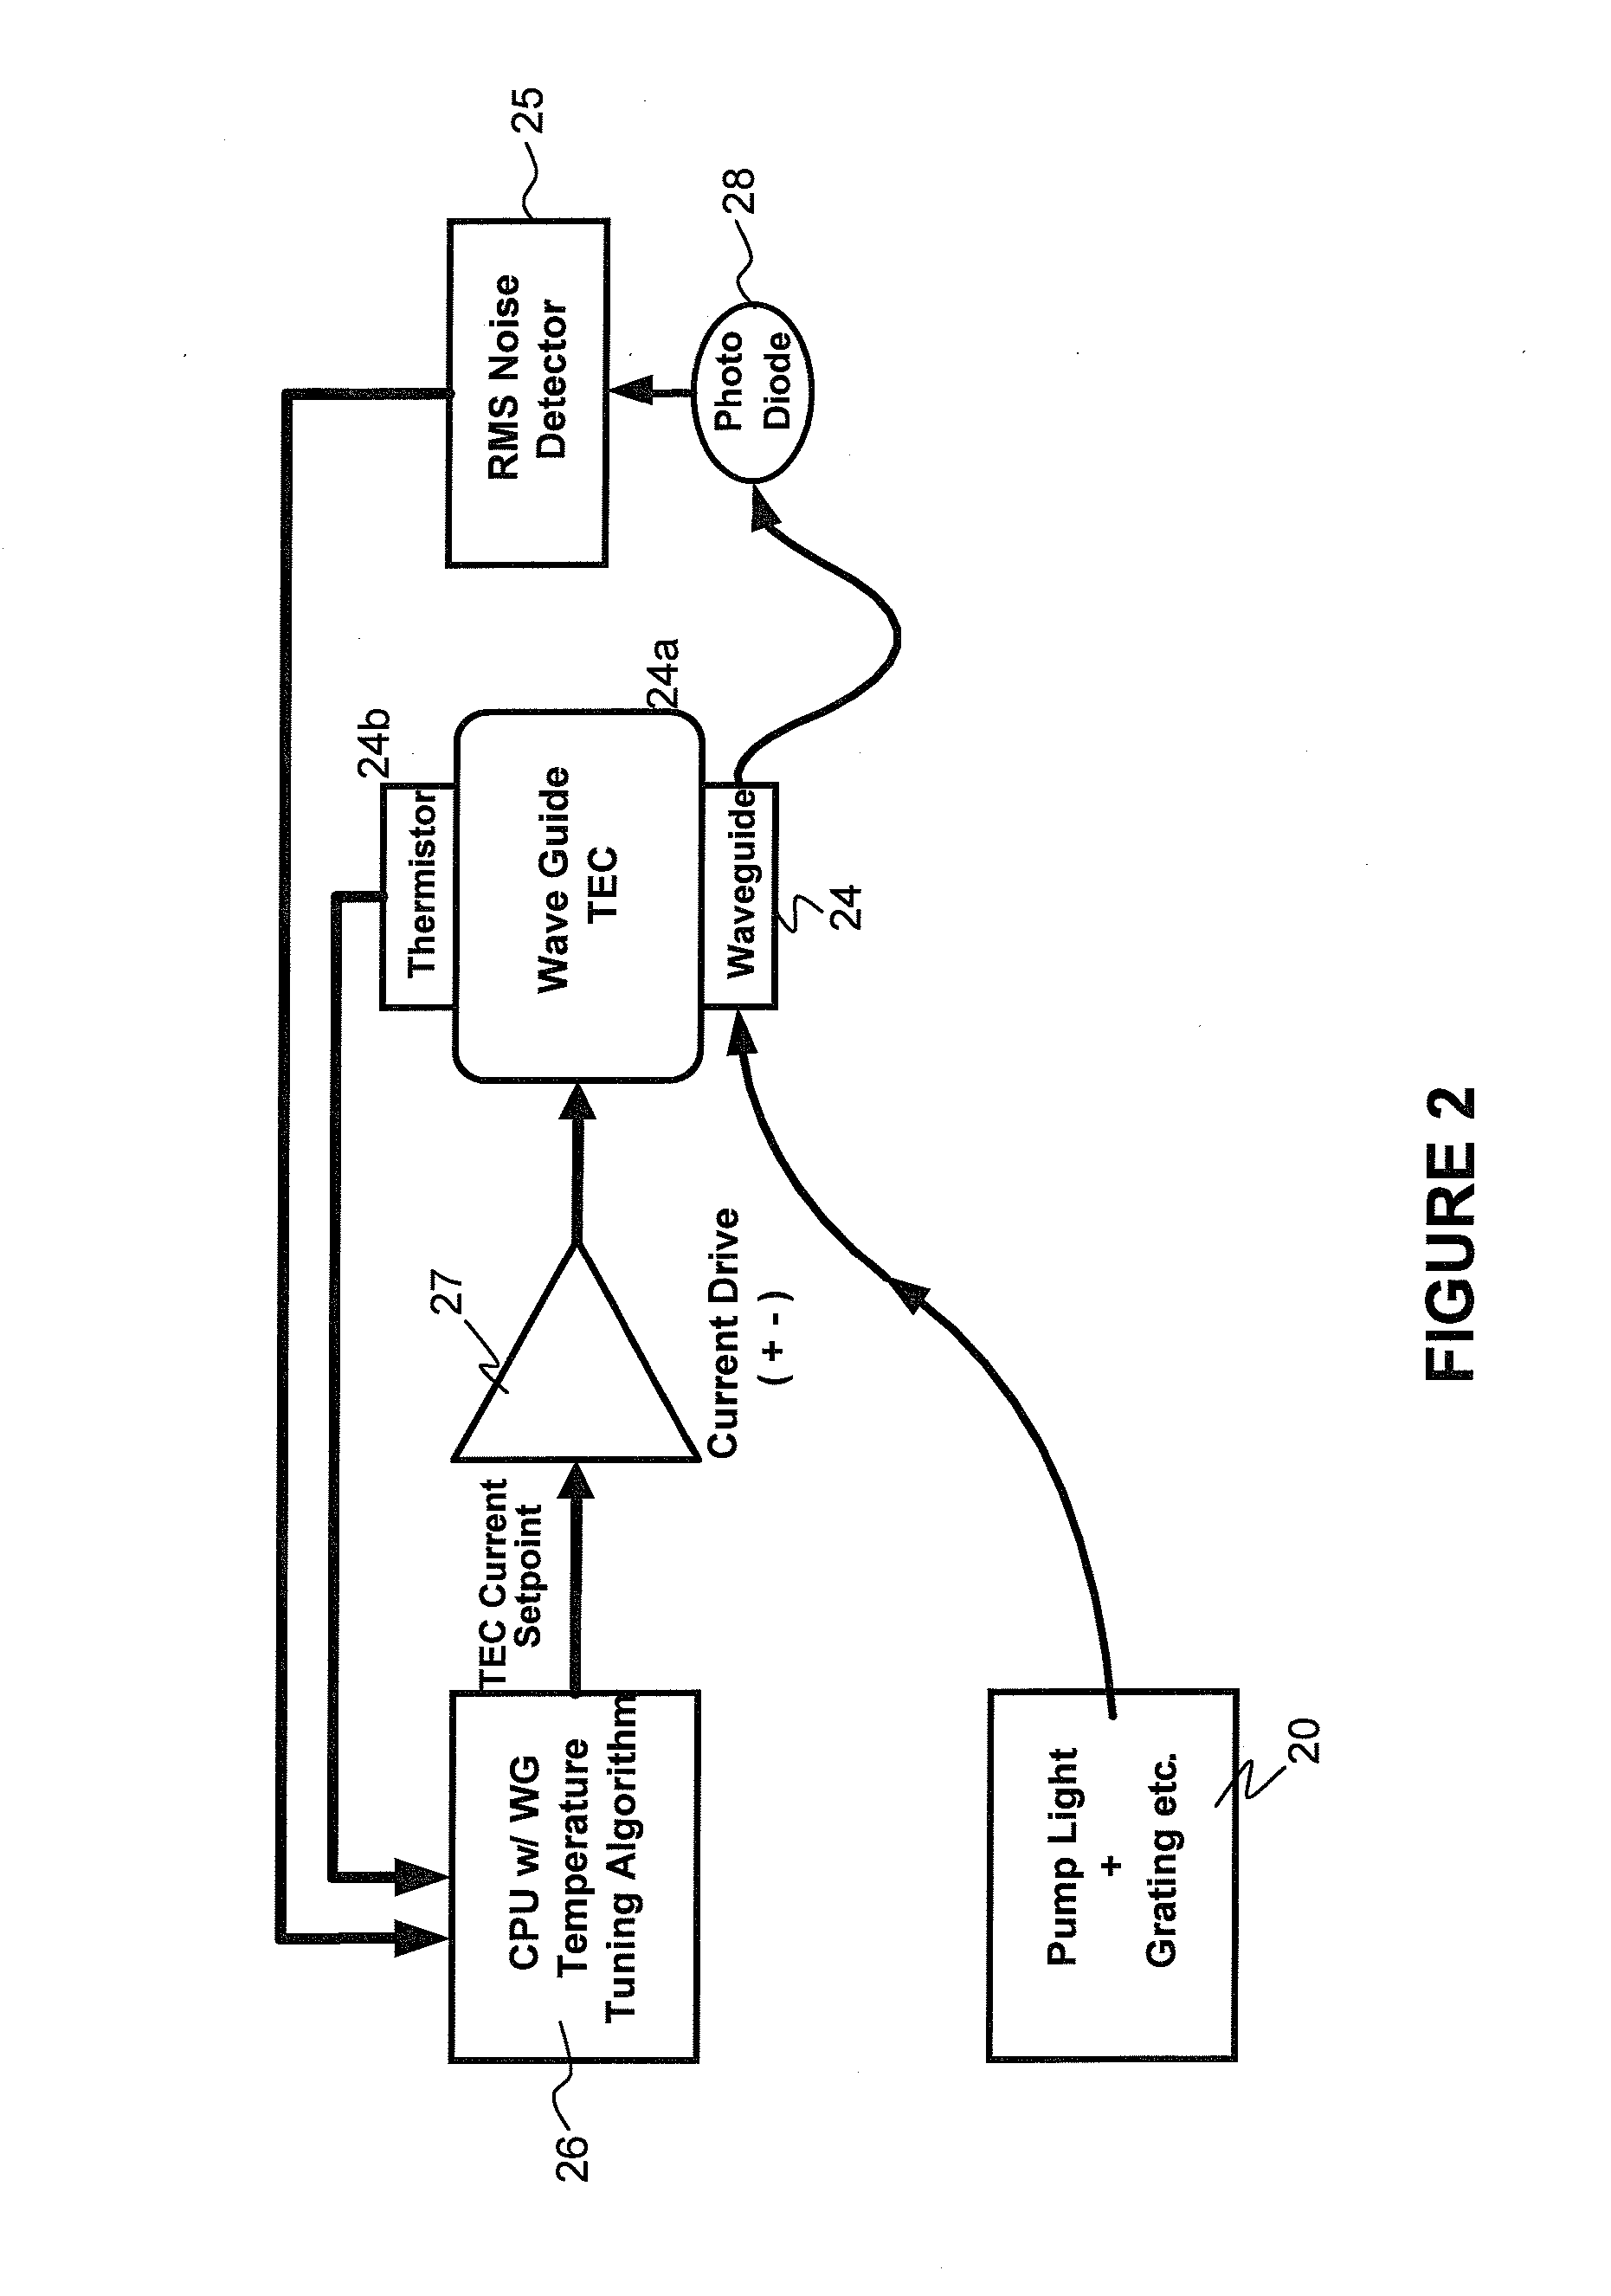 Circuit And Method For Lessening Noise In A Laser System Having A Frequency Converting Element